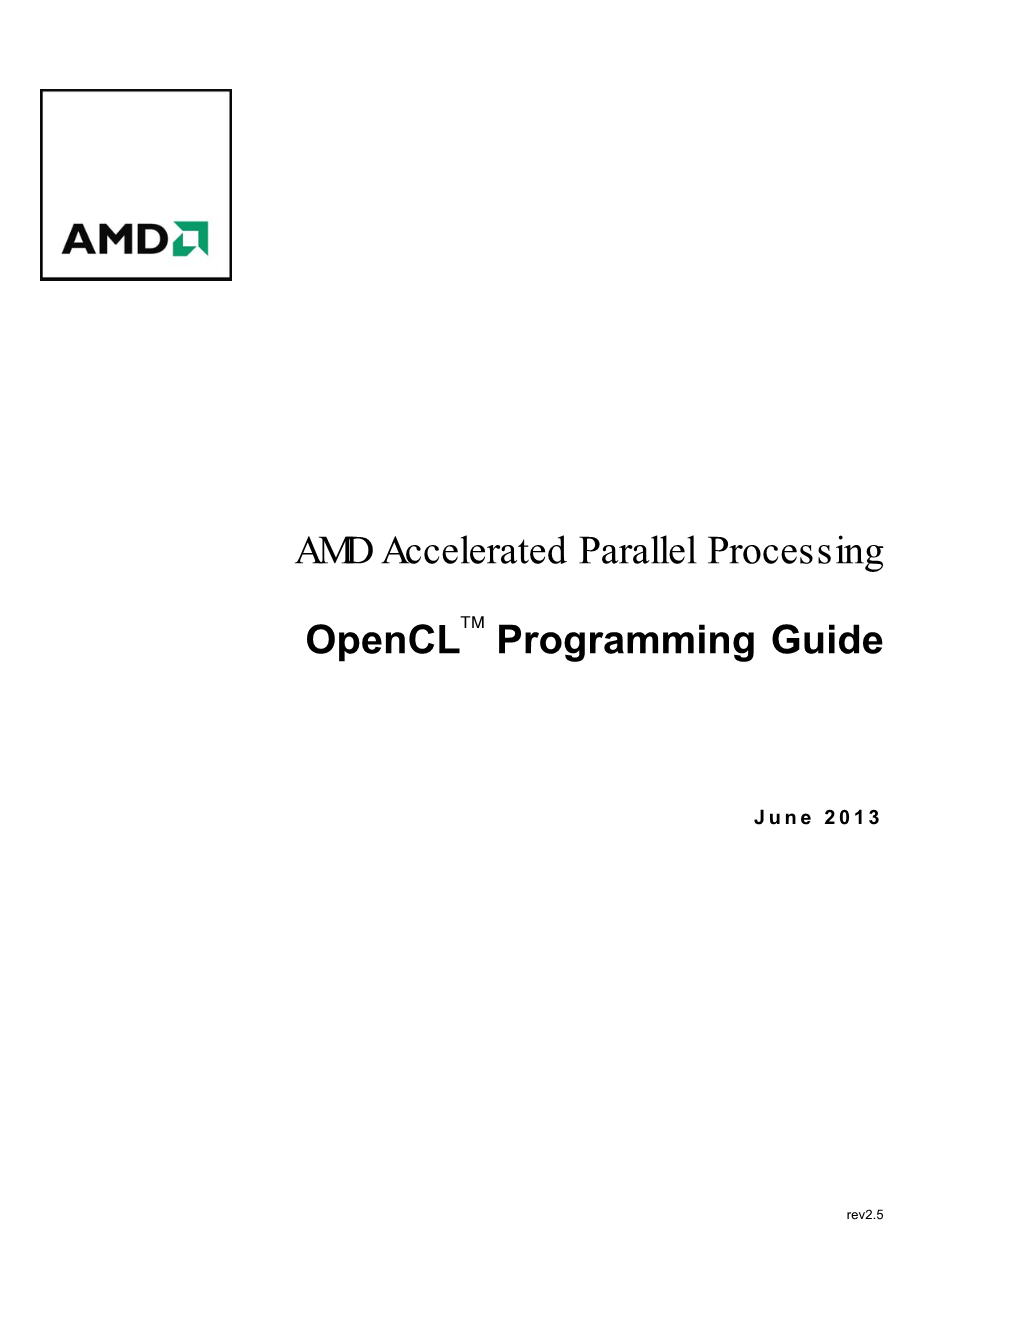 AMD Accelerated Parallel Processing Opencl